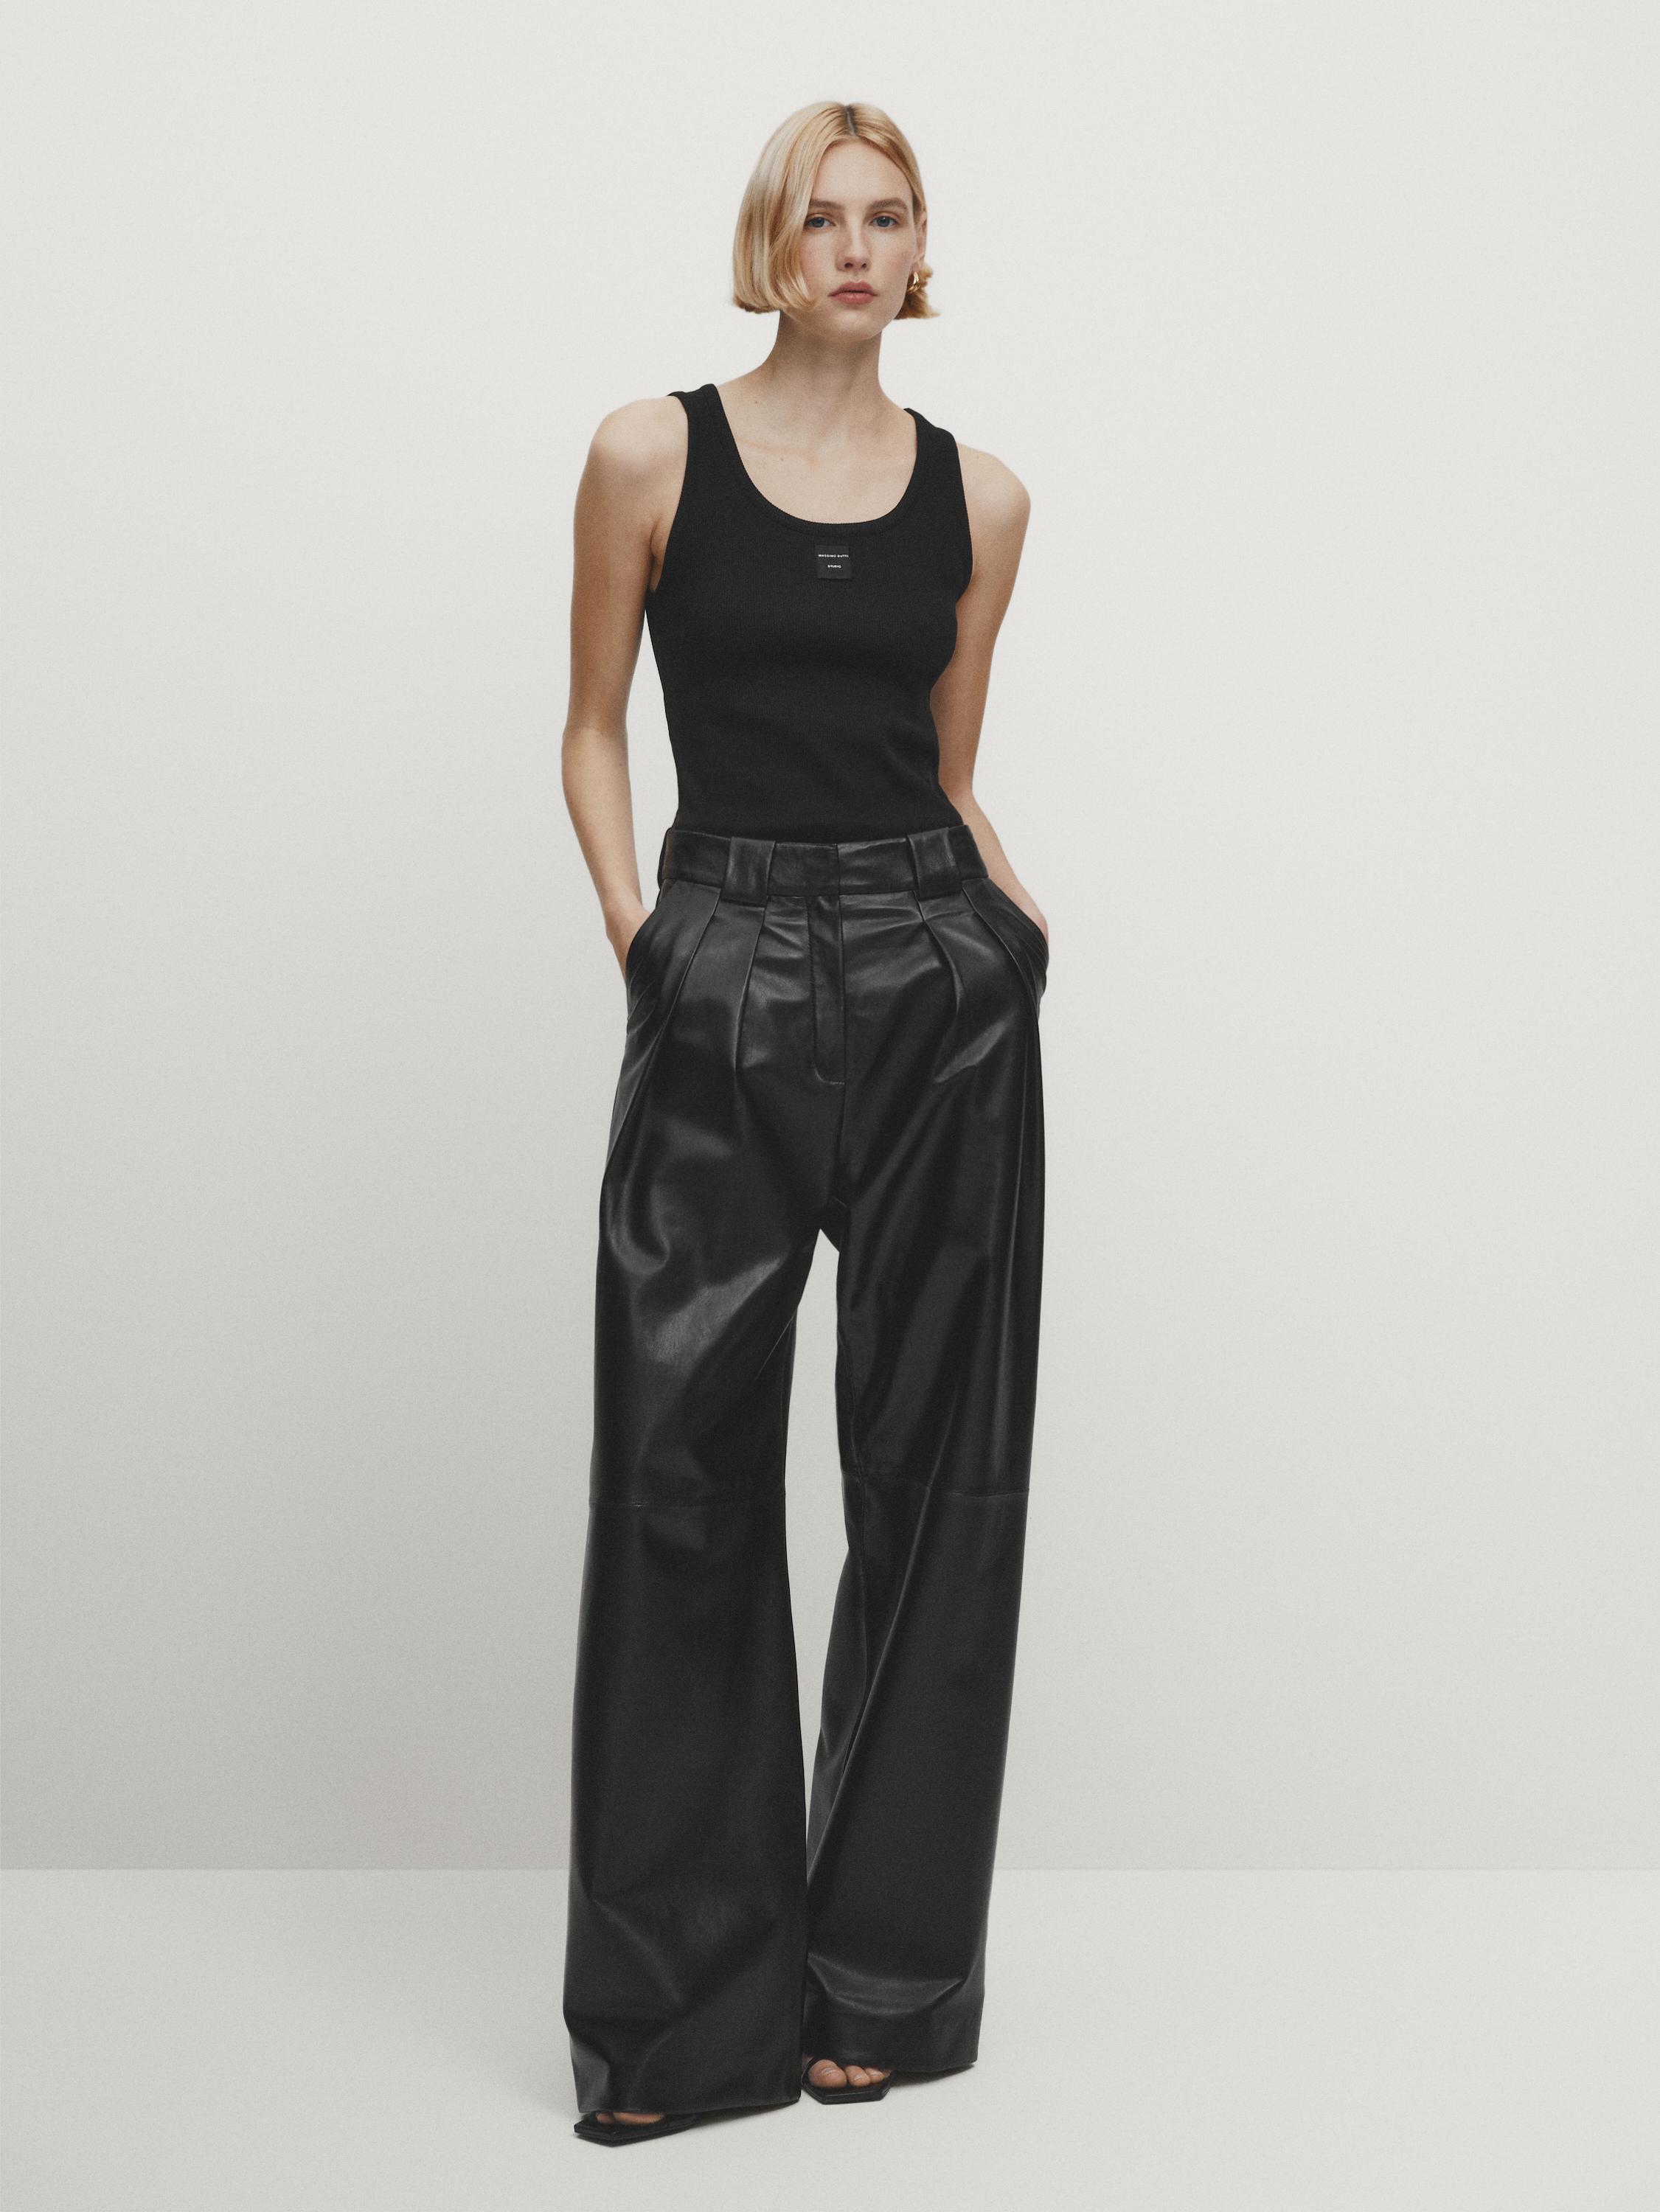 ZARA 100% SHEEP LEATHER FLARED LEATHER TROUSERS LIMITED EDITION XS -  2154/240